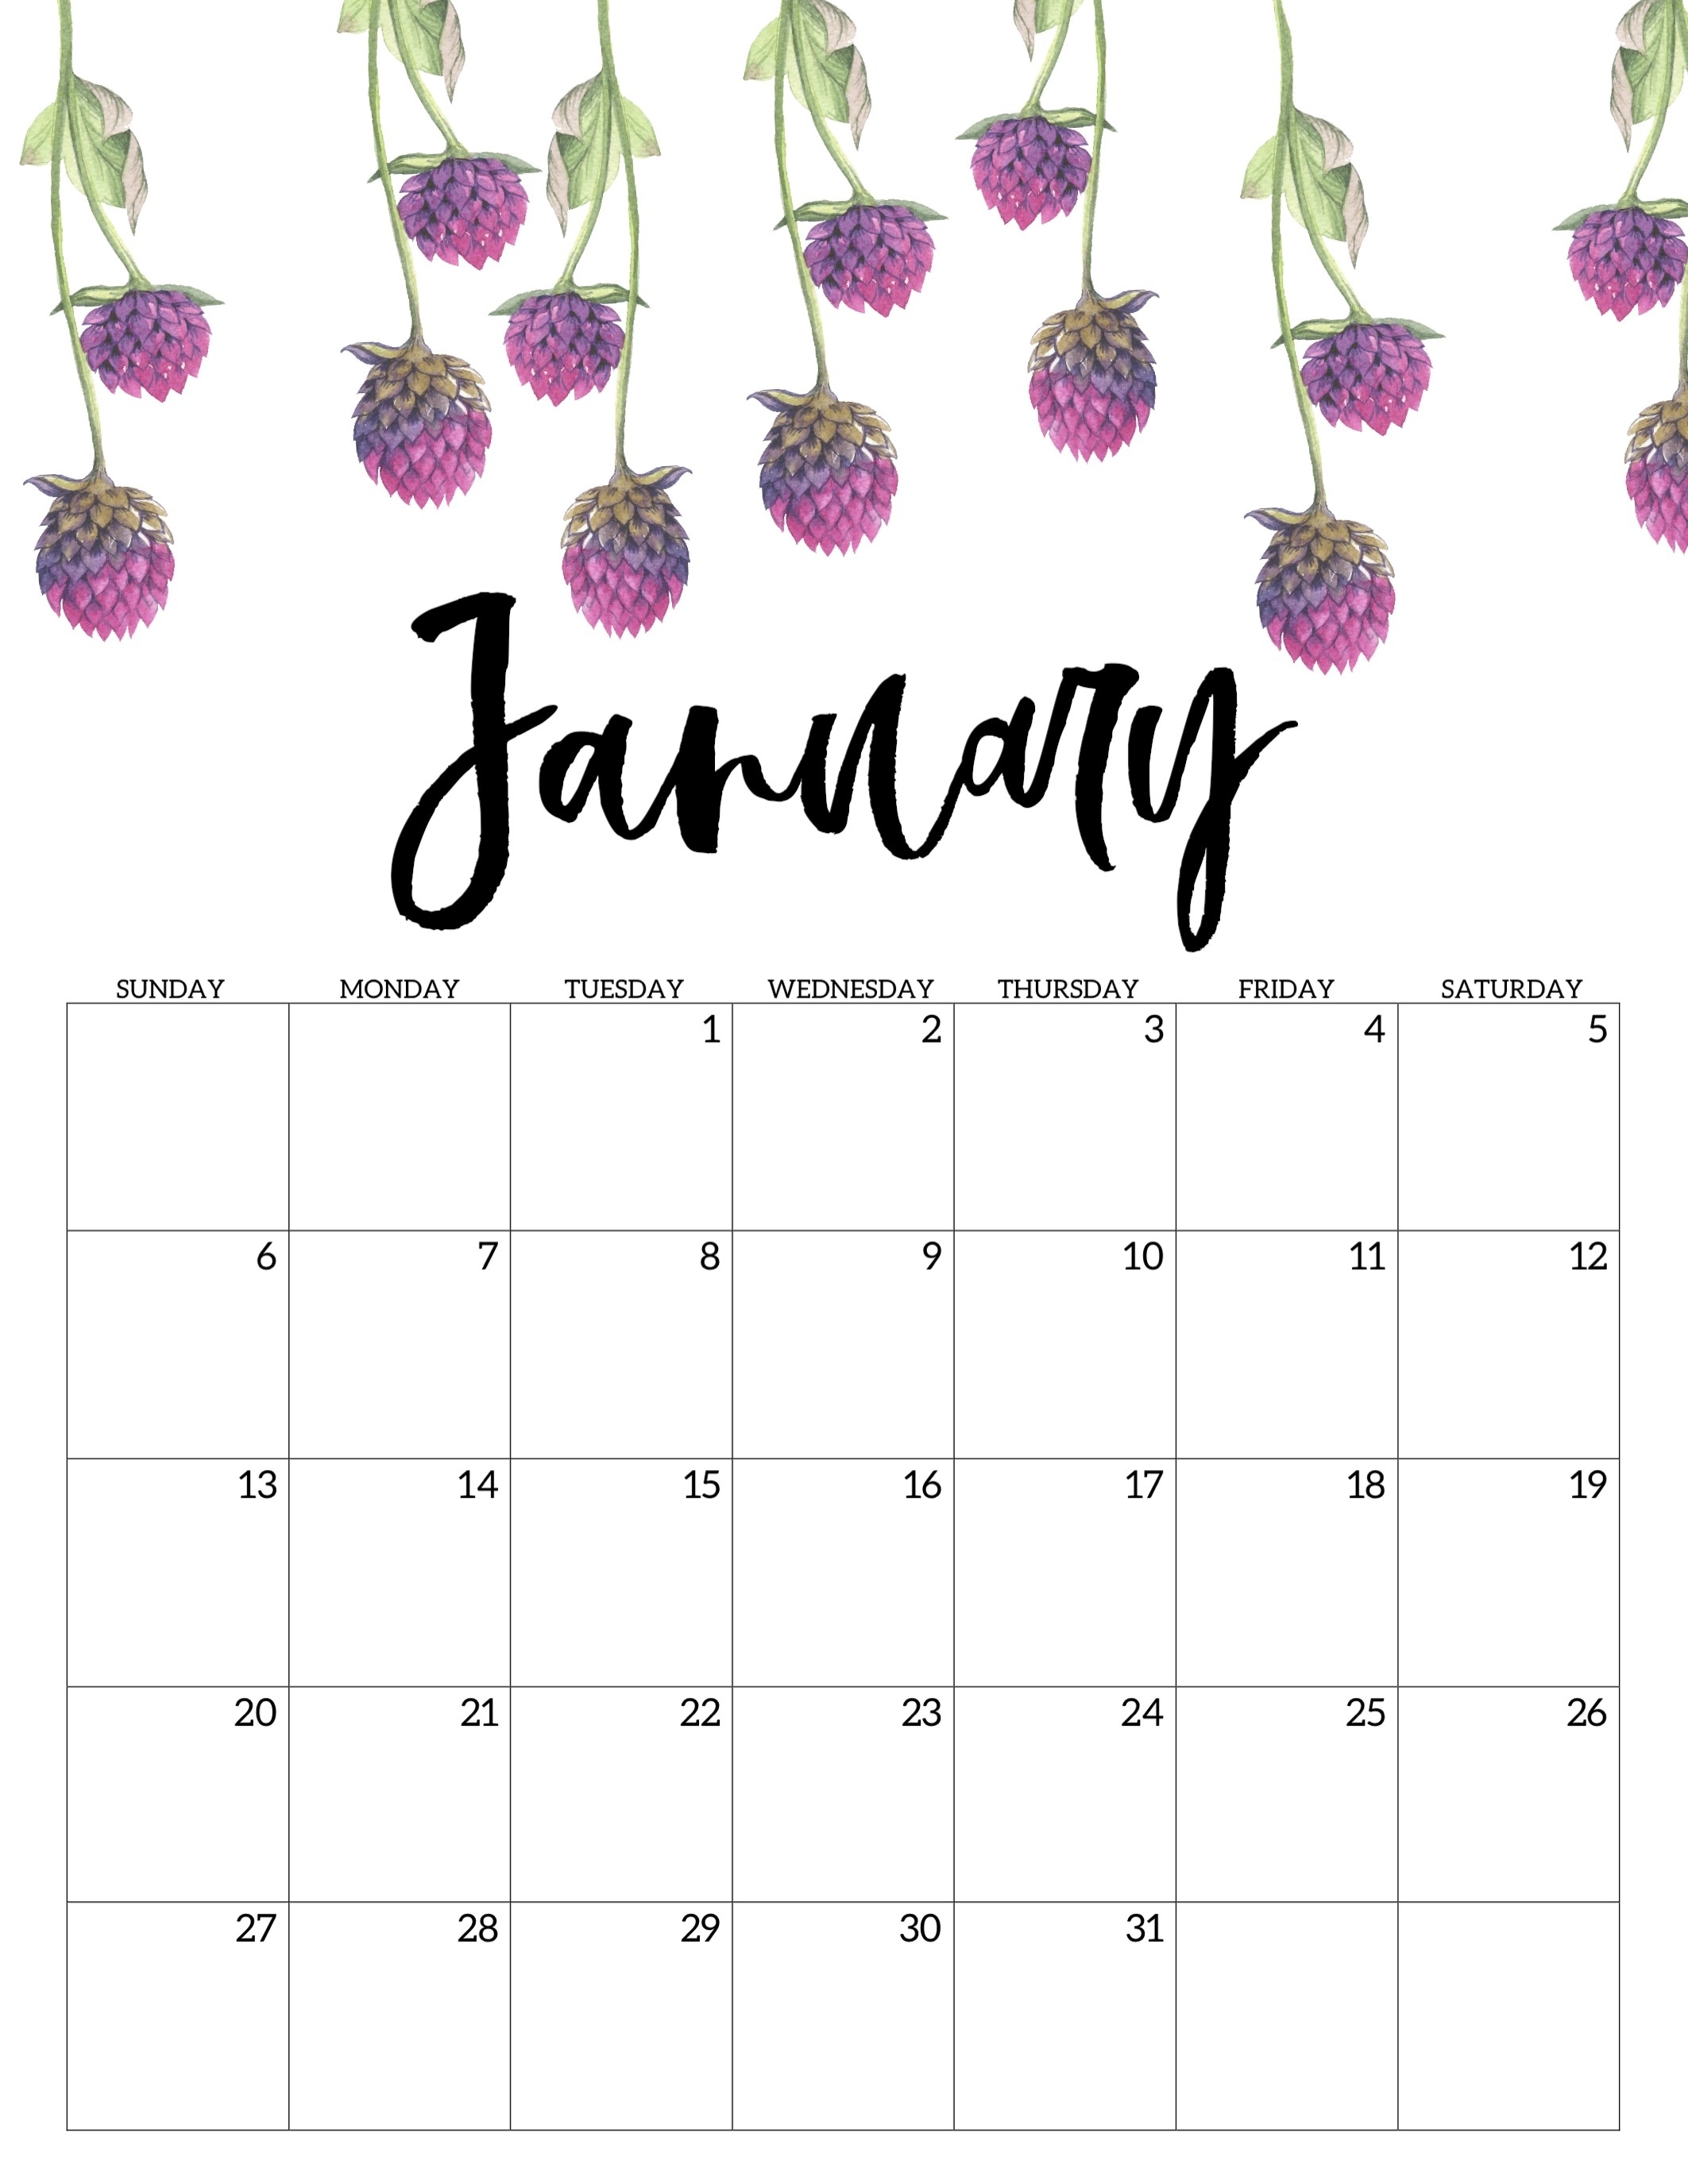 Free Printable Calendar 2019 - Floral - Paper Trail Design with Monthly Calendar Watercolor Floral Printable